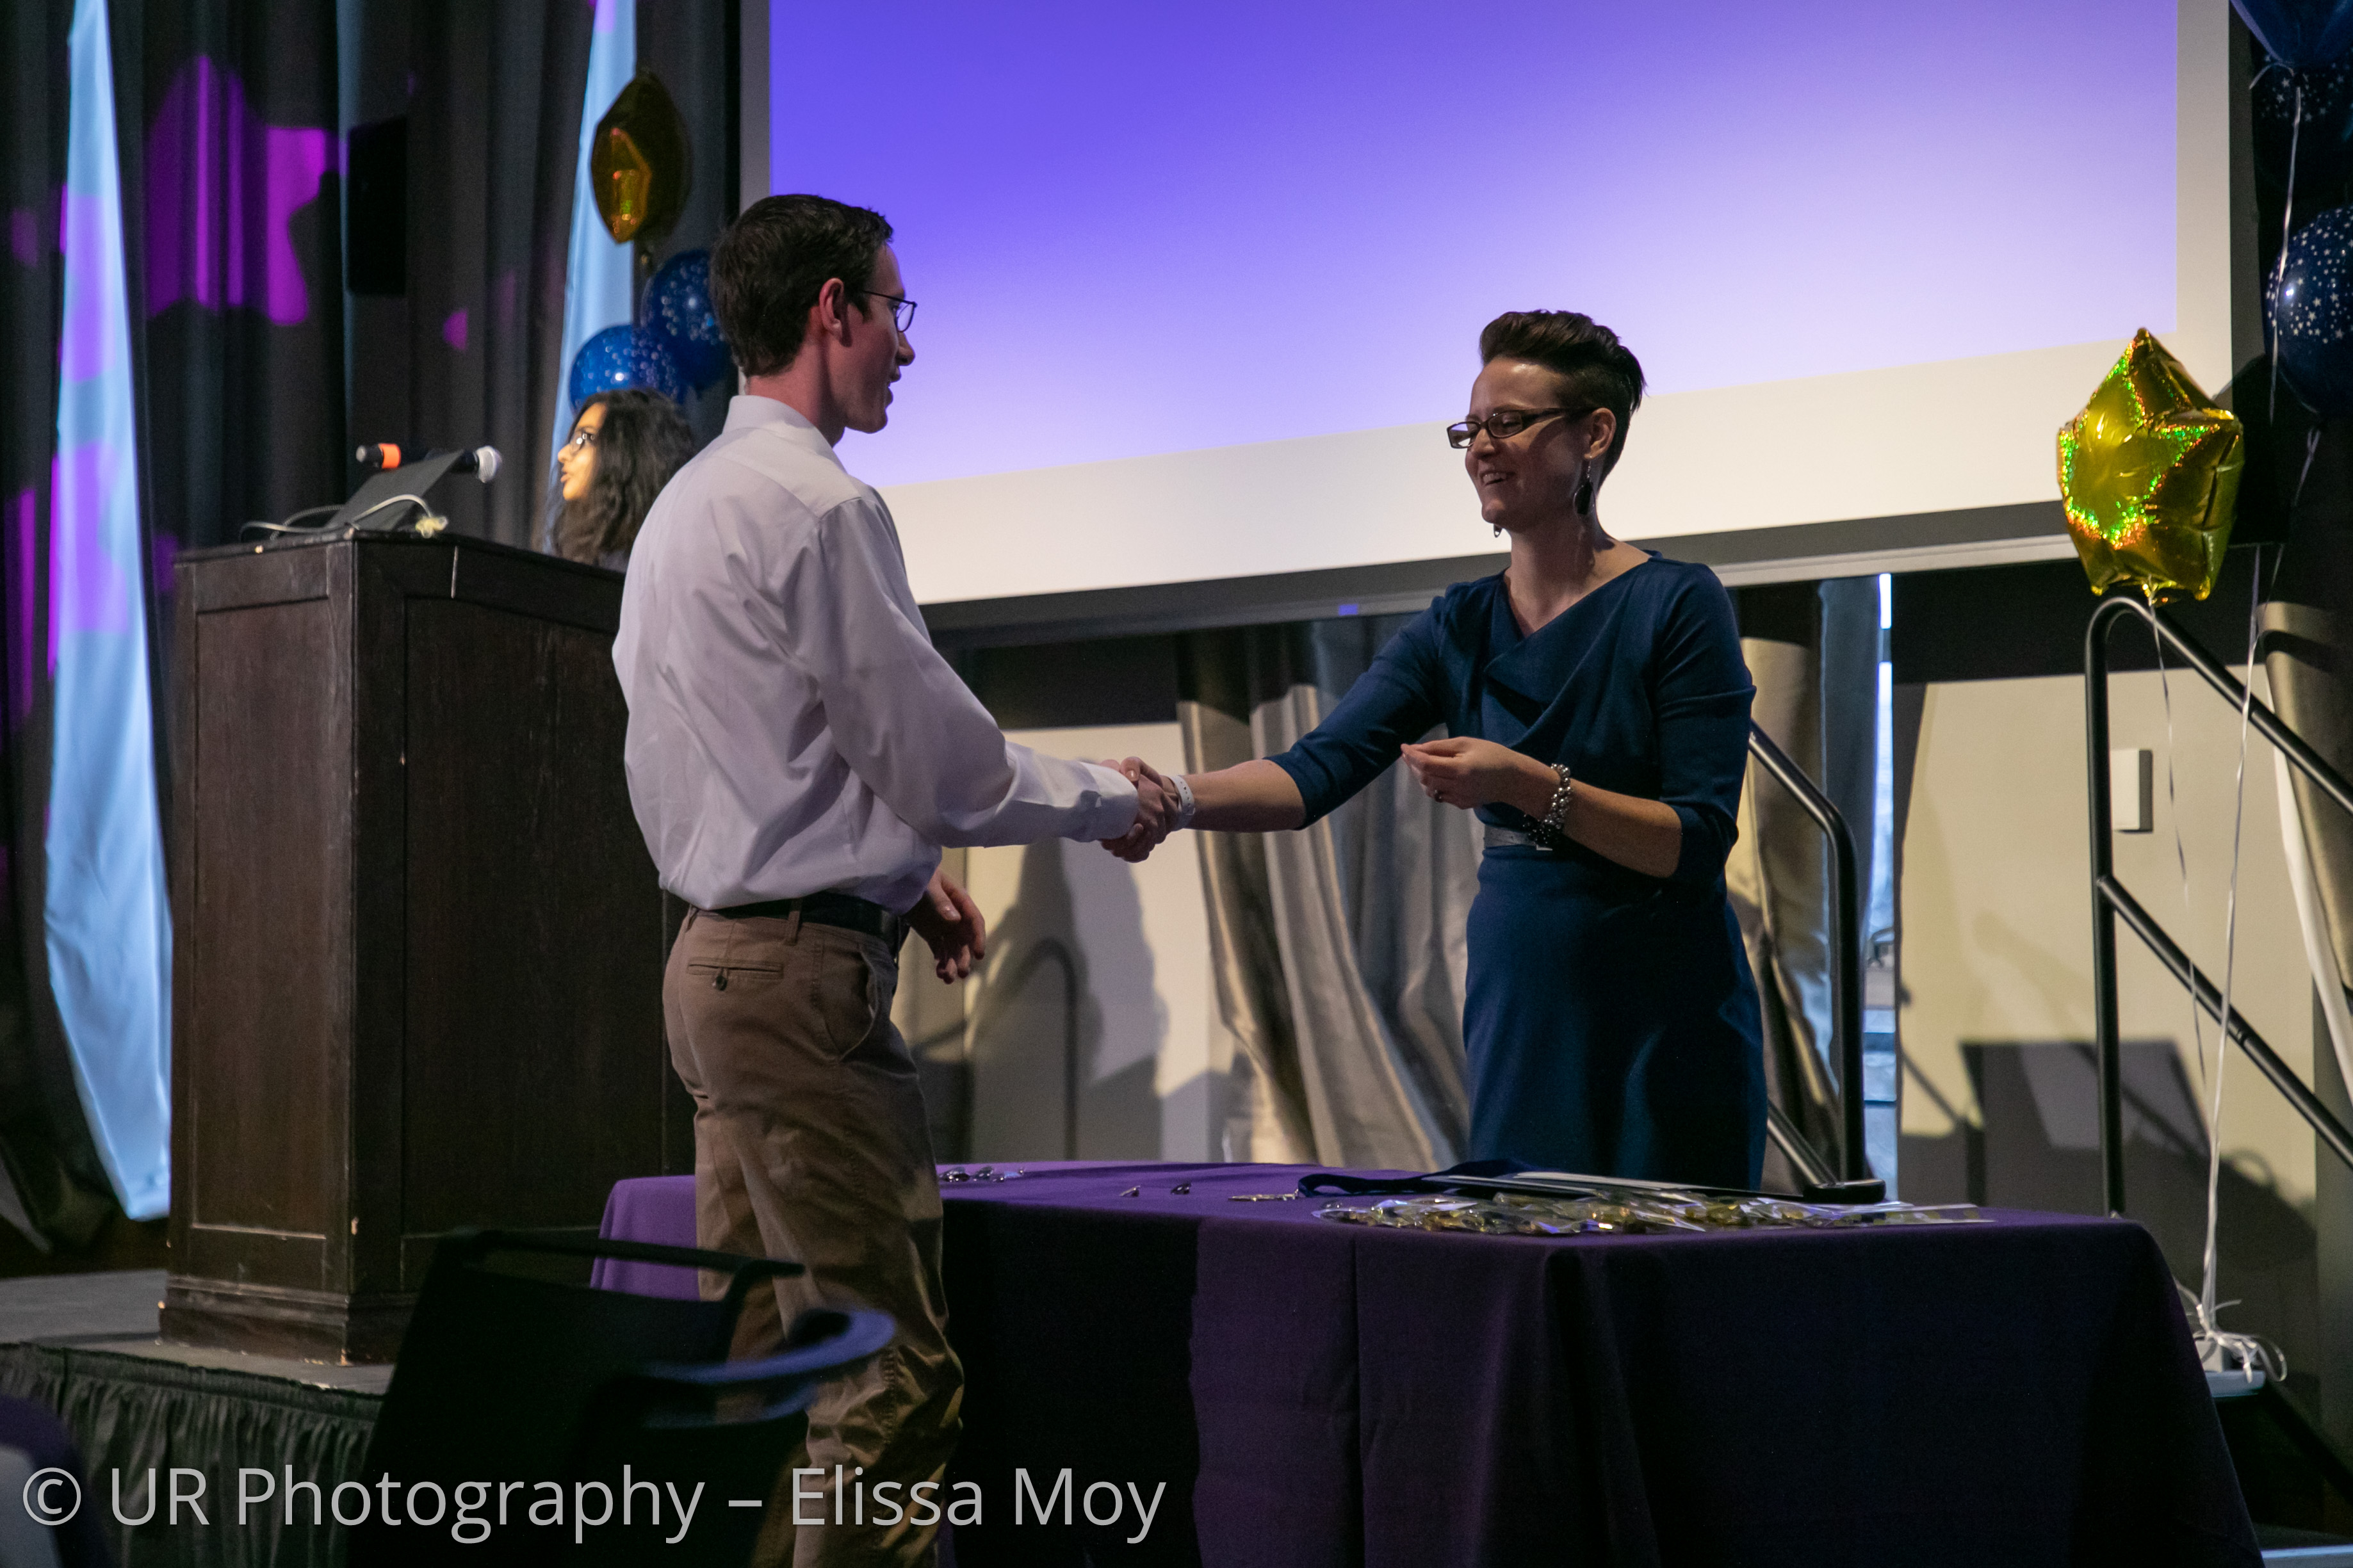 Stacey Fisher shaking hands with an award recipient